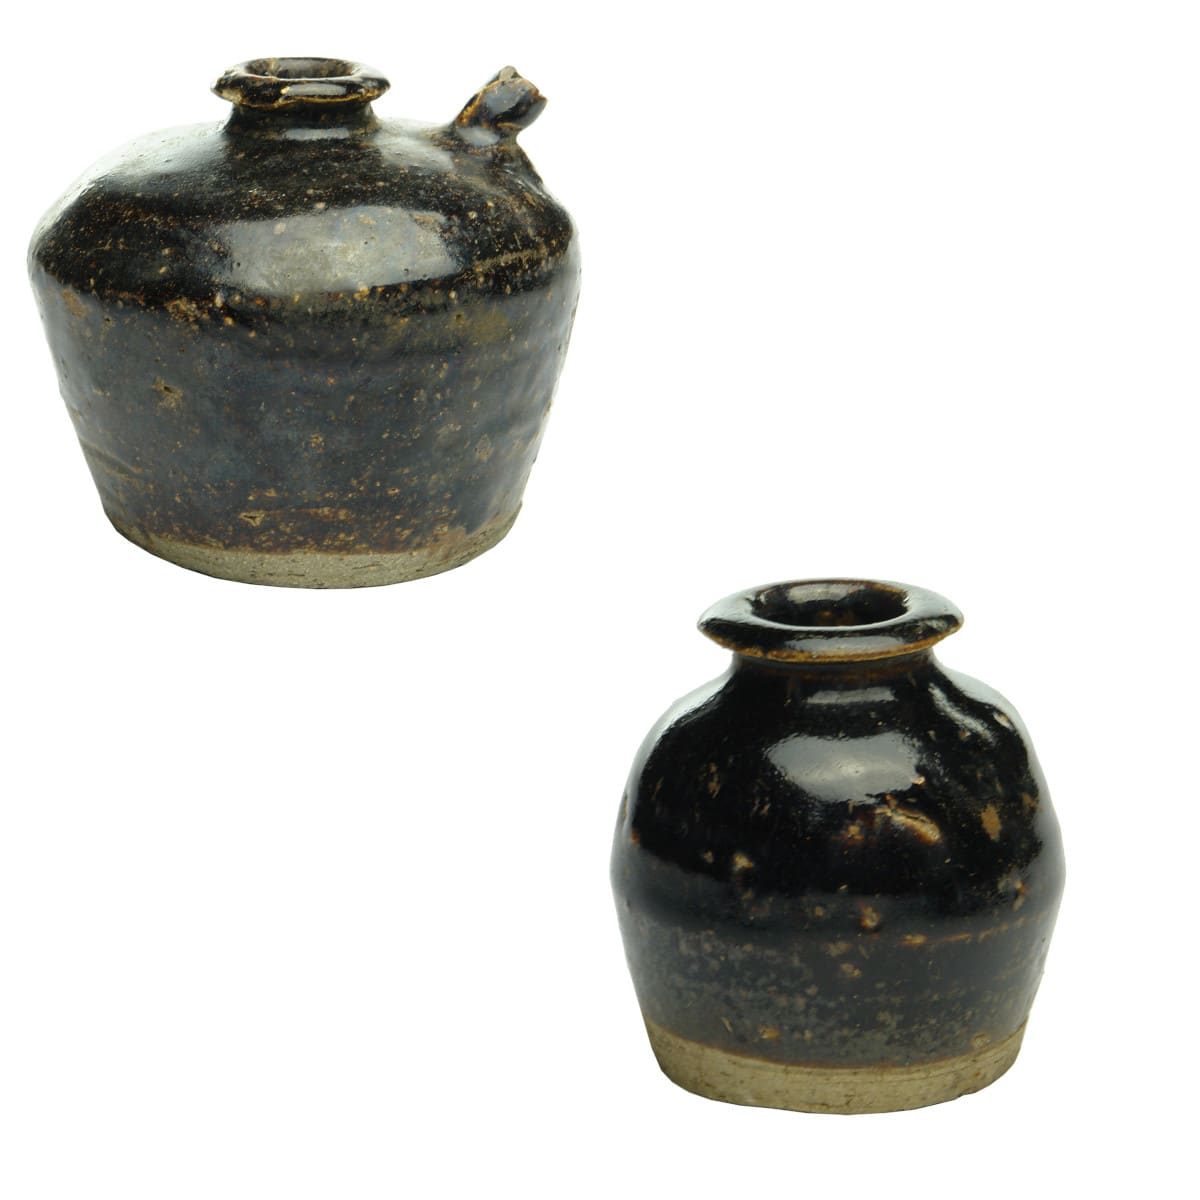 2 small brown glazed Chinese jars: Soy Sauce and Spice or Sauce jar.